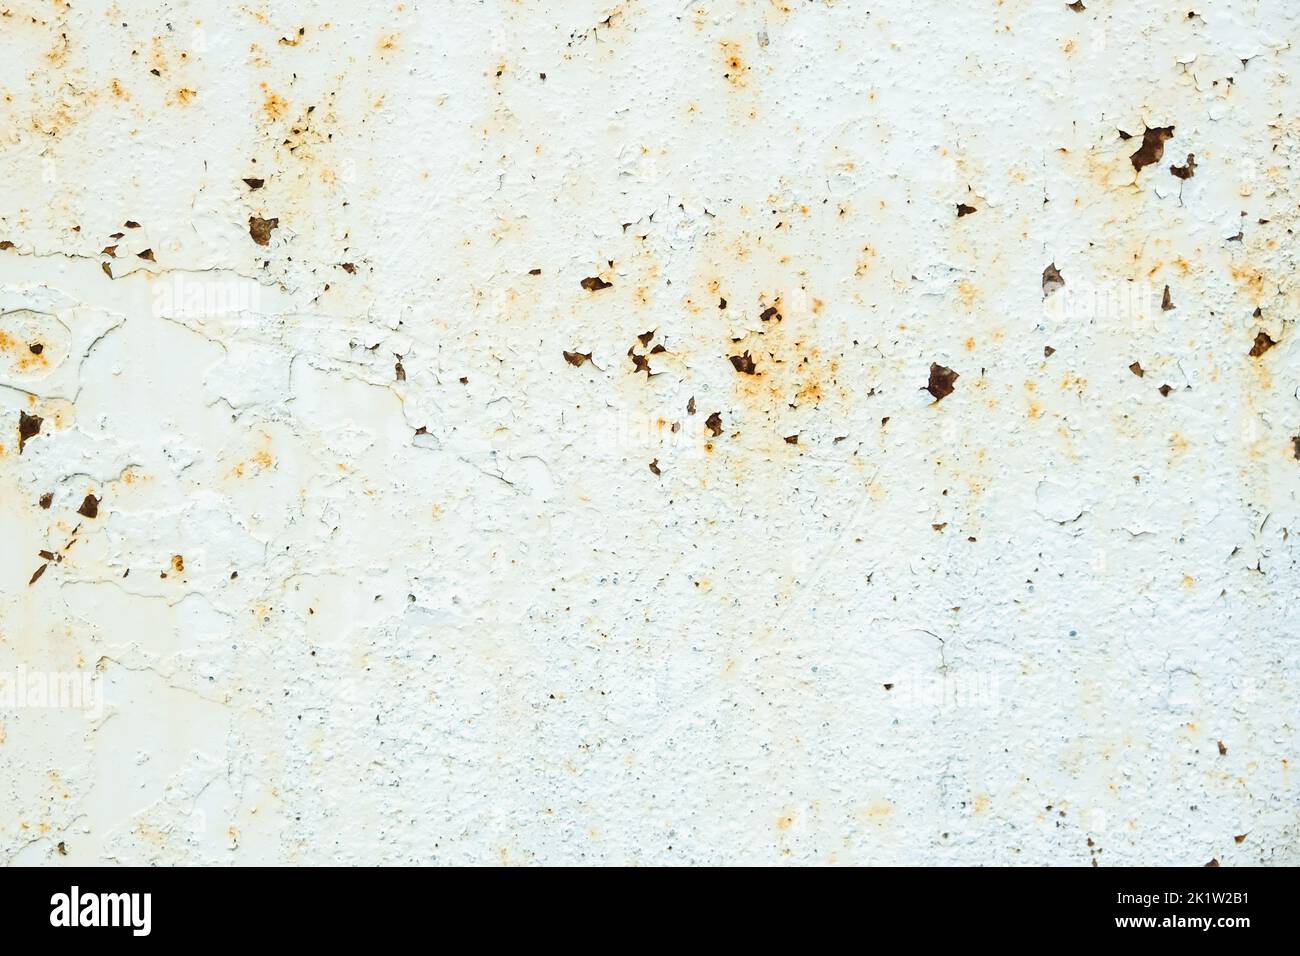 Corrosion of metal. Rust shows through the white paint. Rusty texture. Stock Photo